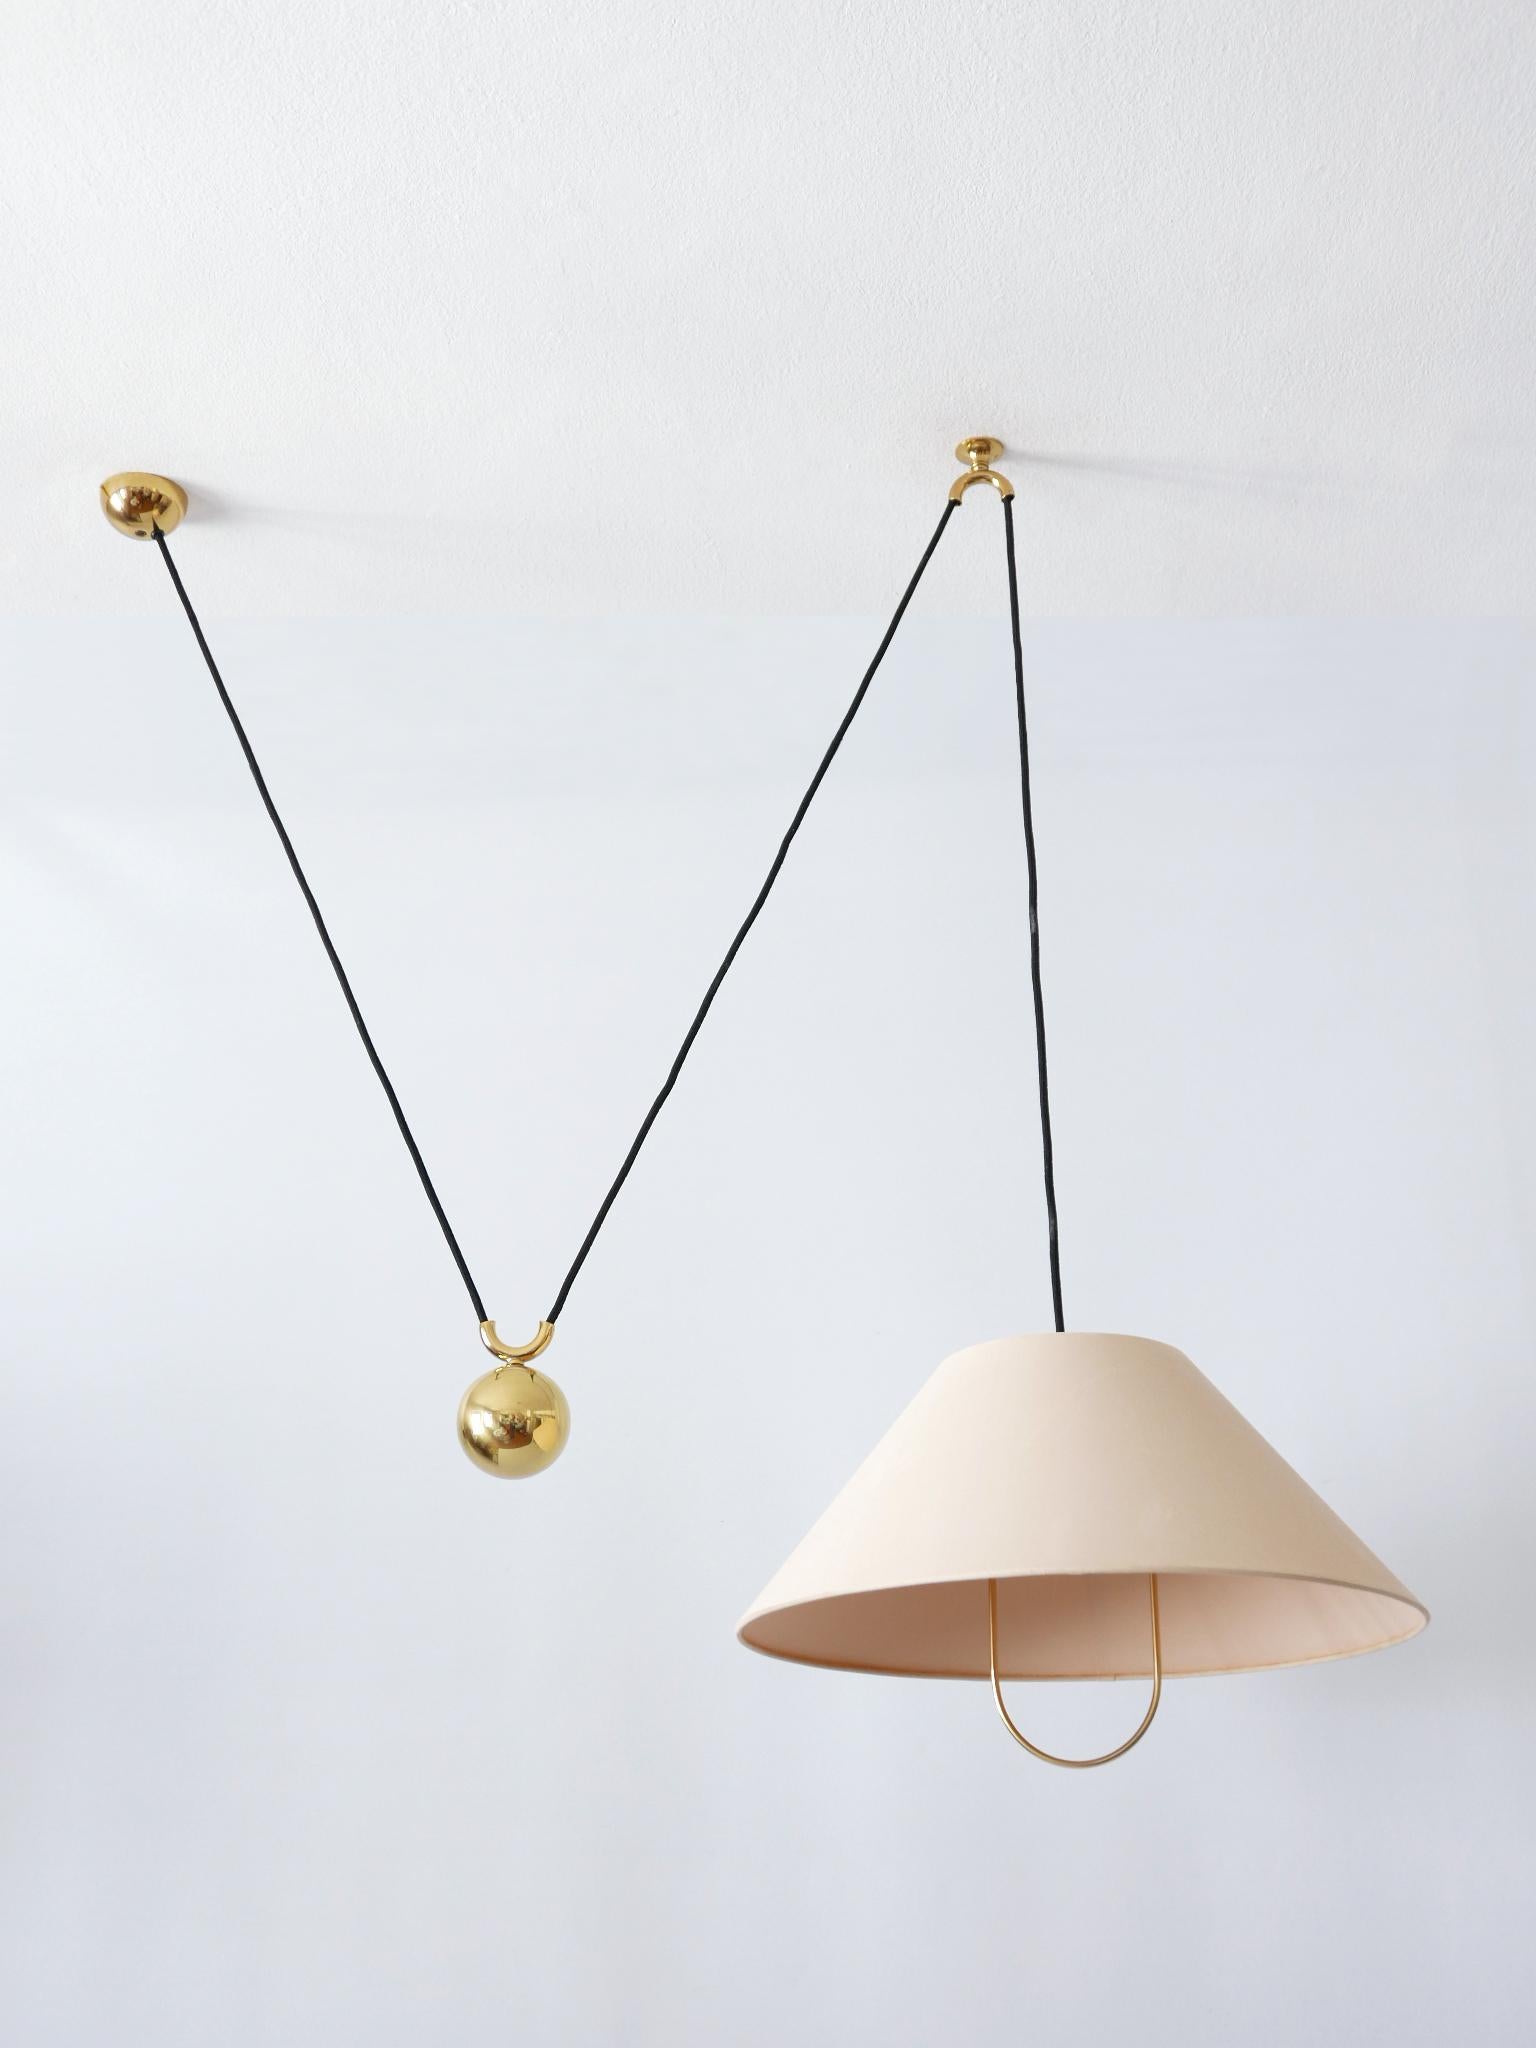 Polished Early, Rare & Elegant Counterweight Pendant Lamp by Florian Schulz Germany 1960s